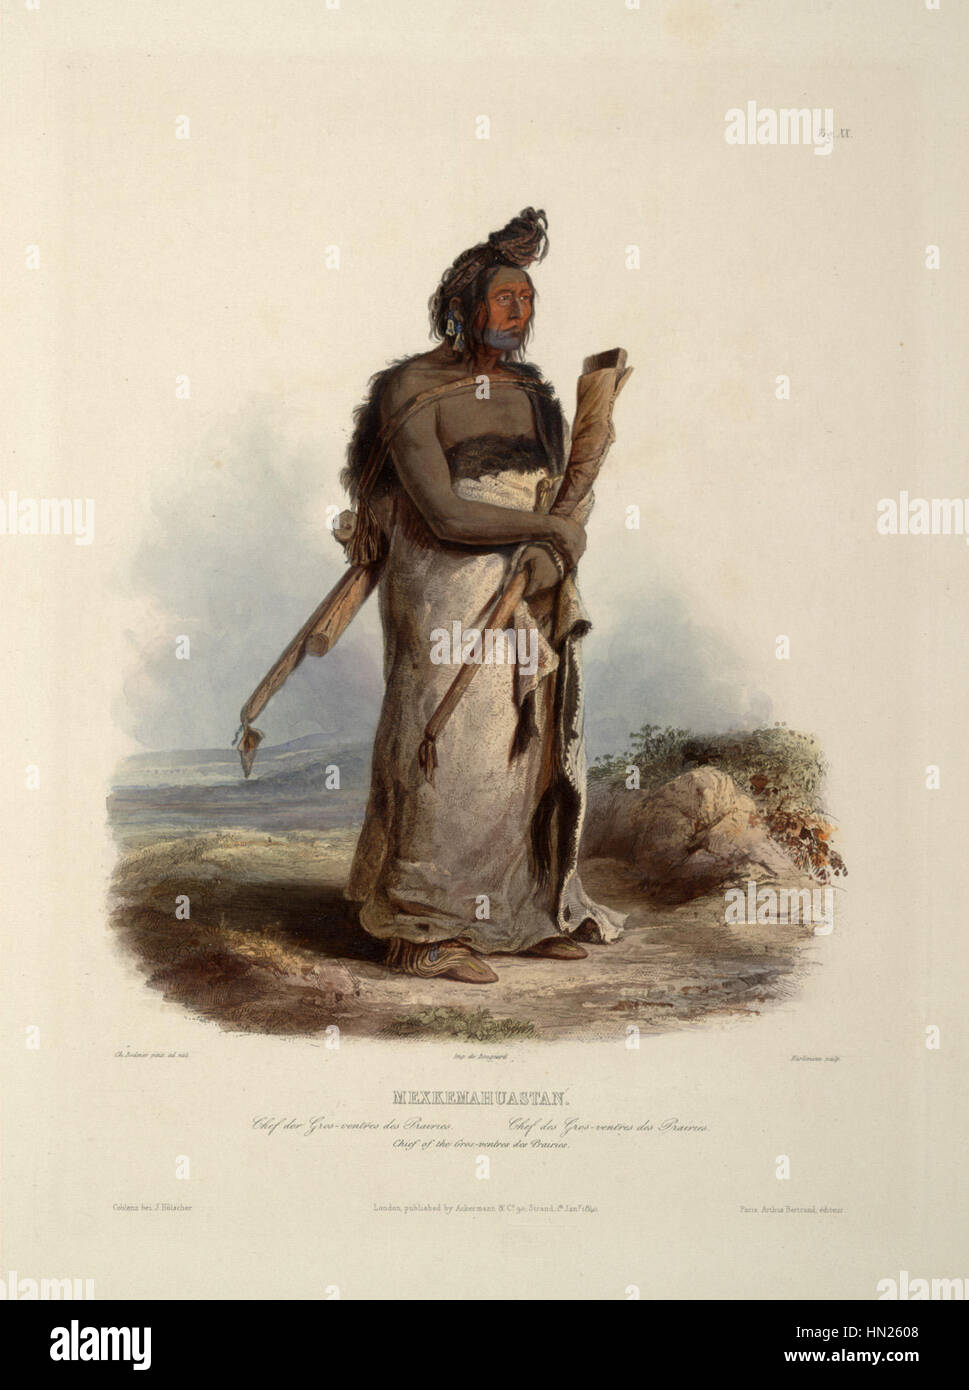 Mexkemahuastan Chief of the Gros-ventres des Praires Chief of the Bigbellies of the prarie 0020v Stock Photo